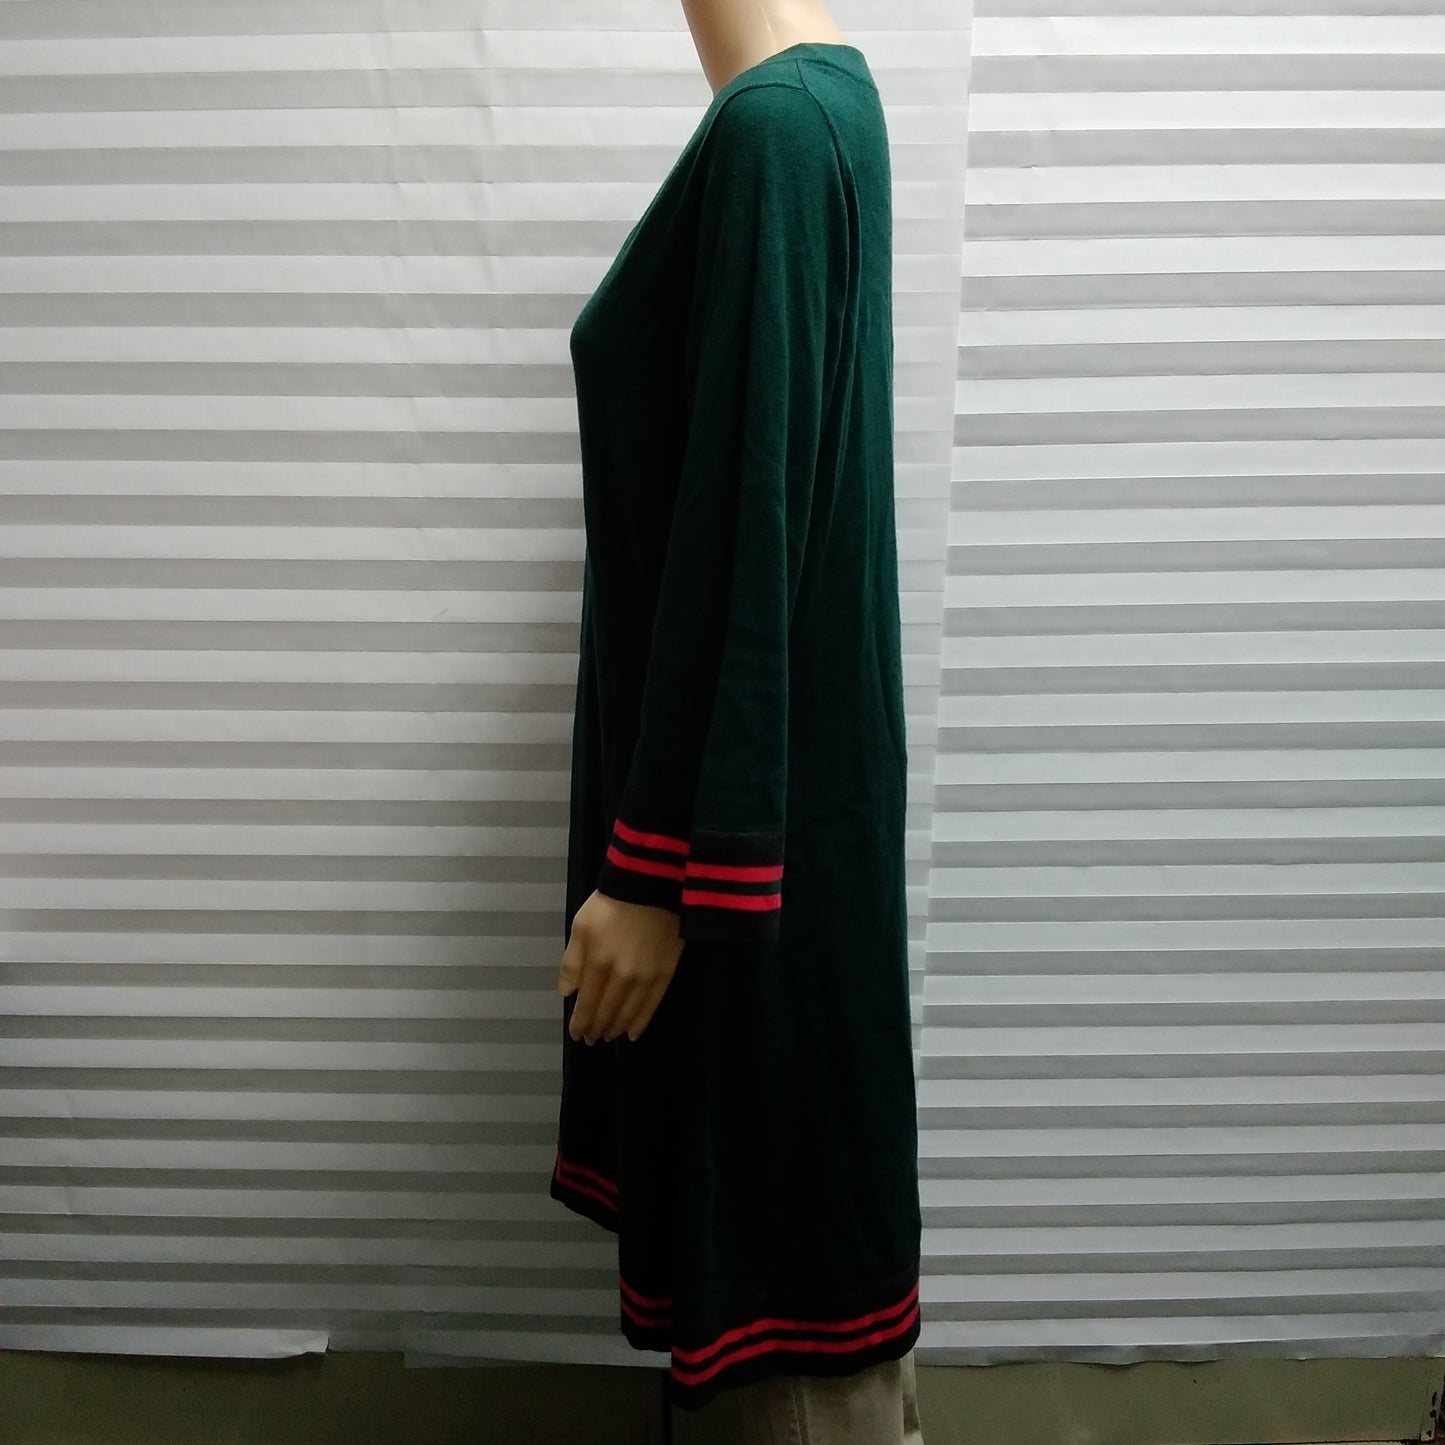 NWT - BODEN green red Wool Blend Trudy Sweater Dress - Size: 14